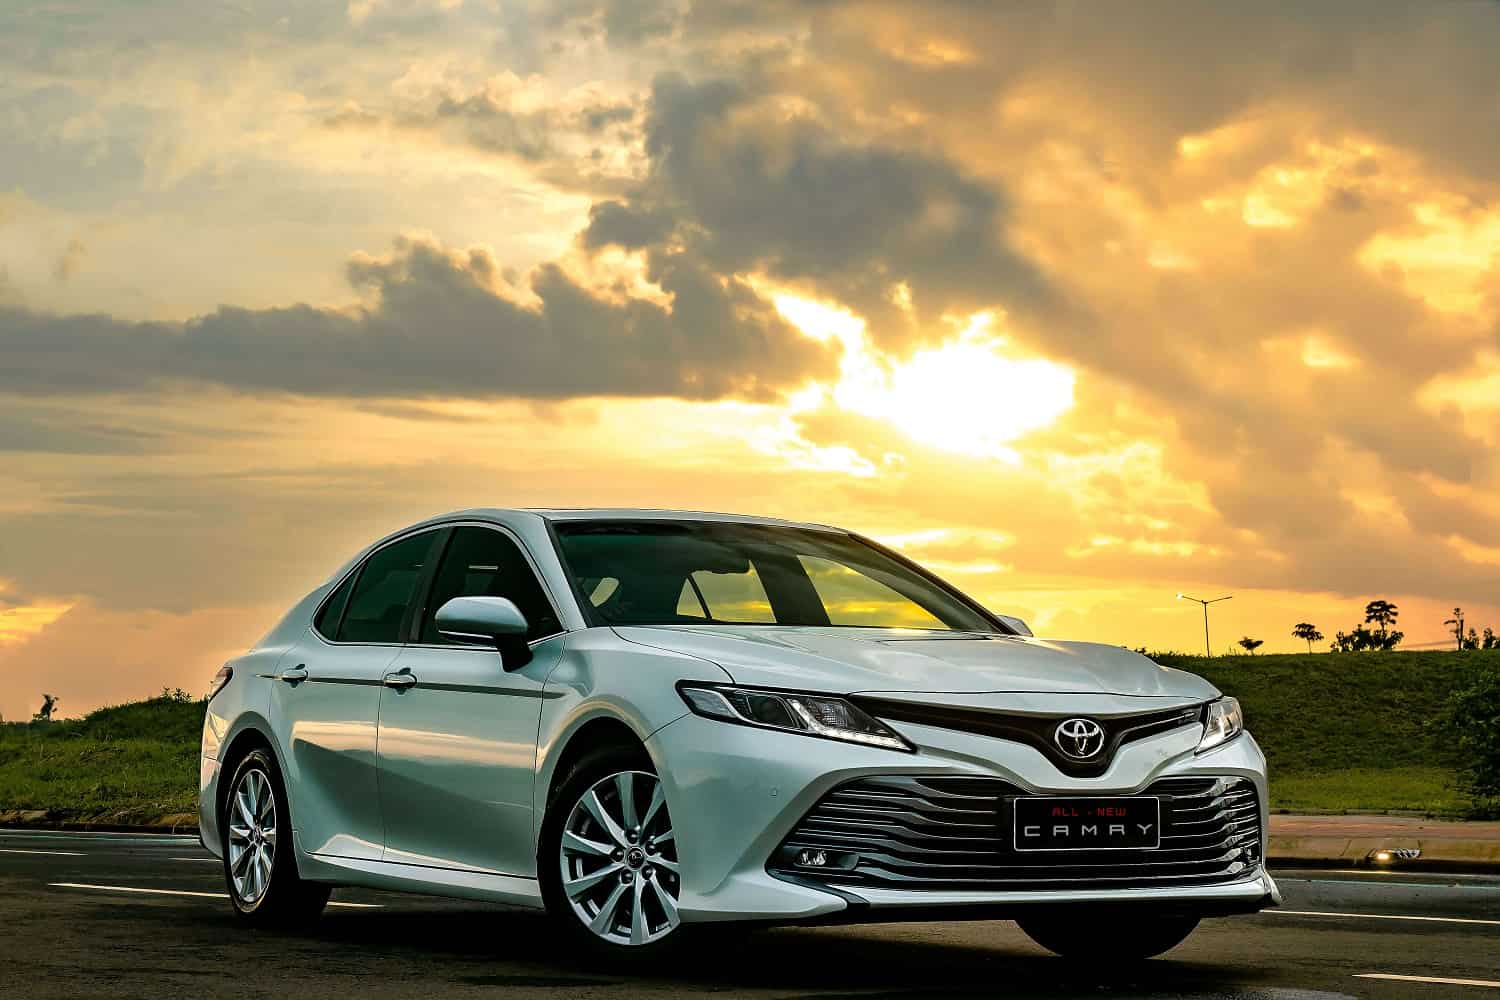 You are currently viewing Harga Camry